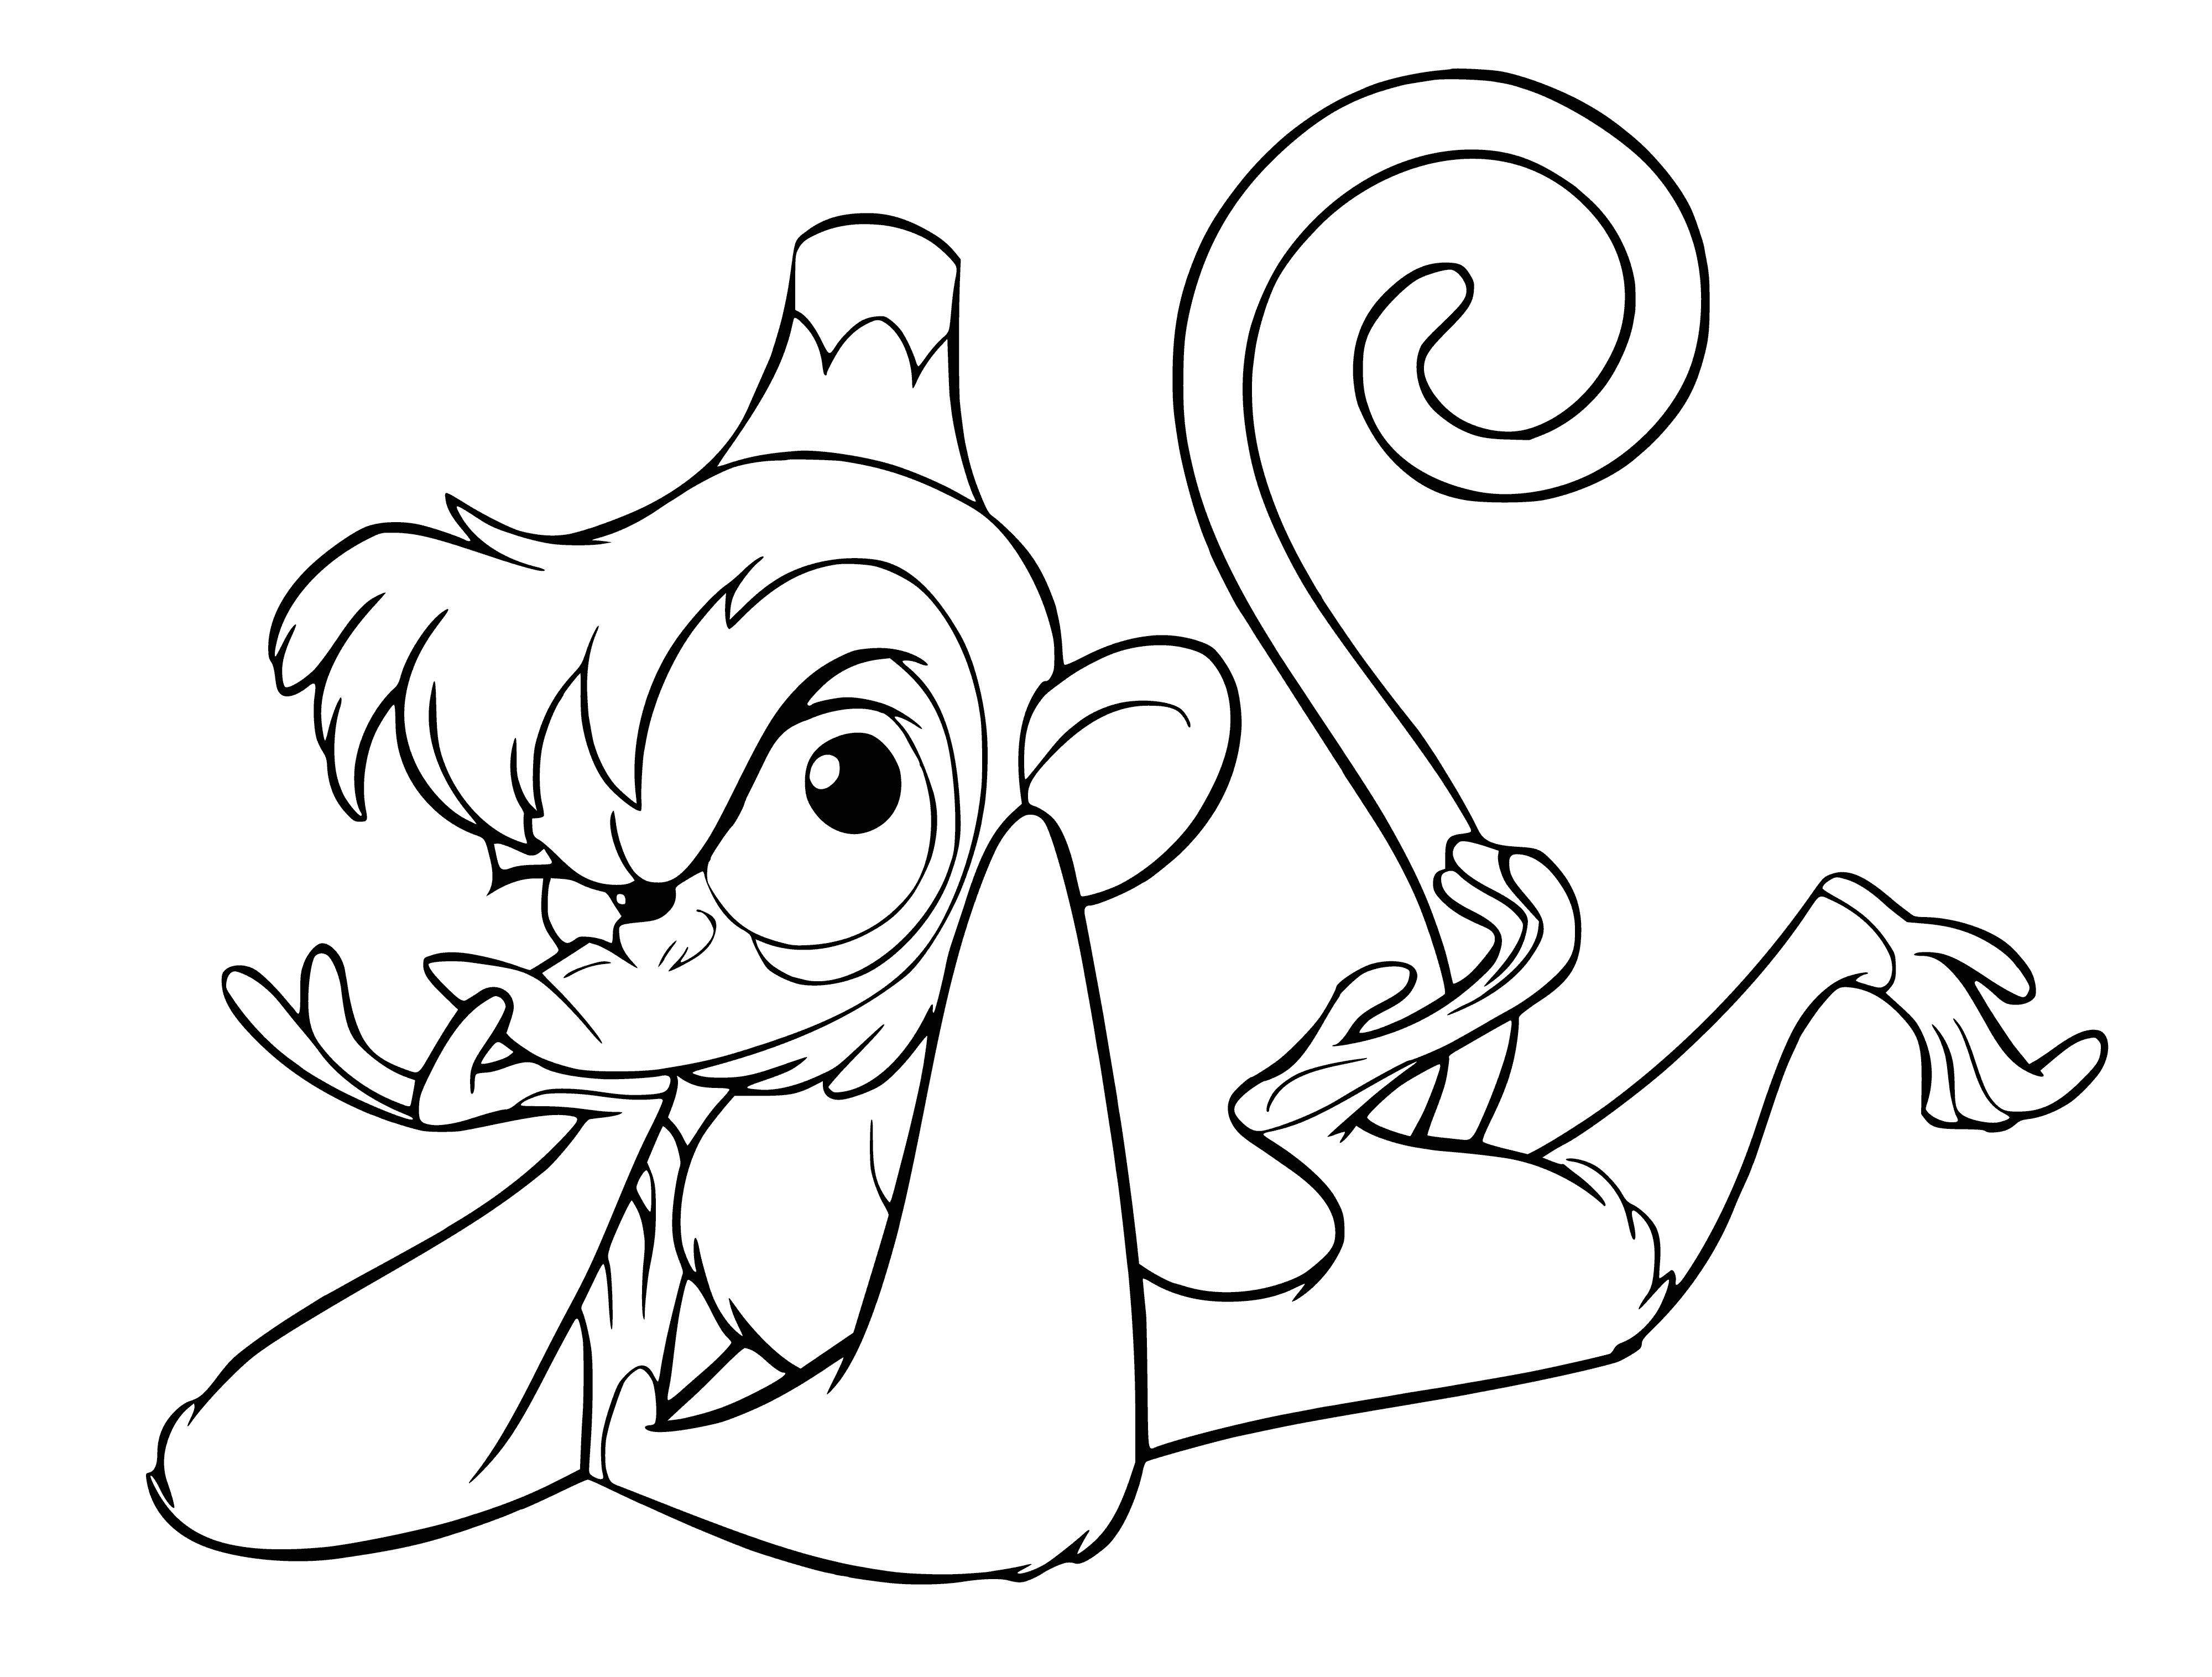 coloring page: Small tan monkey atop green water jug, w/hands around neck & tail hanging down. Grinning & looking off to side.